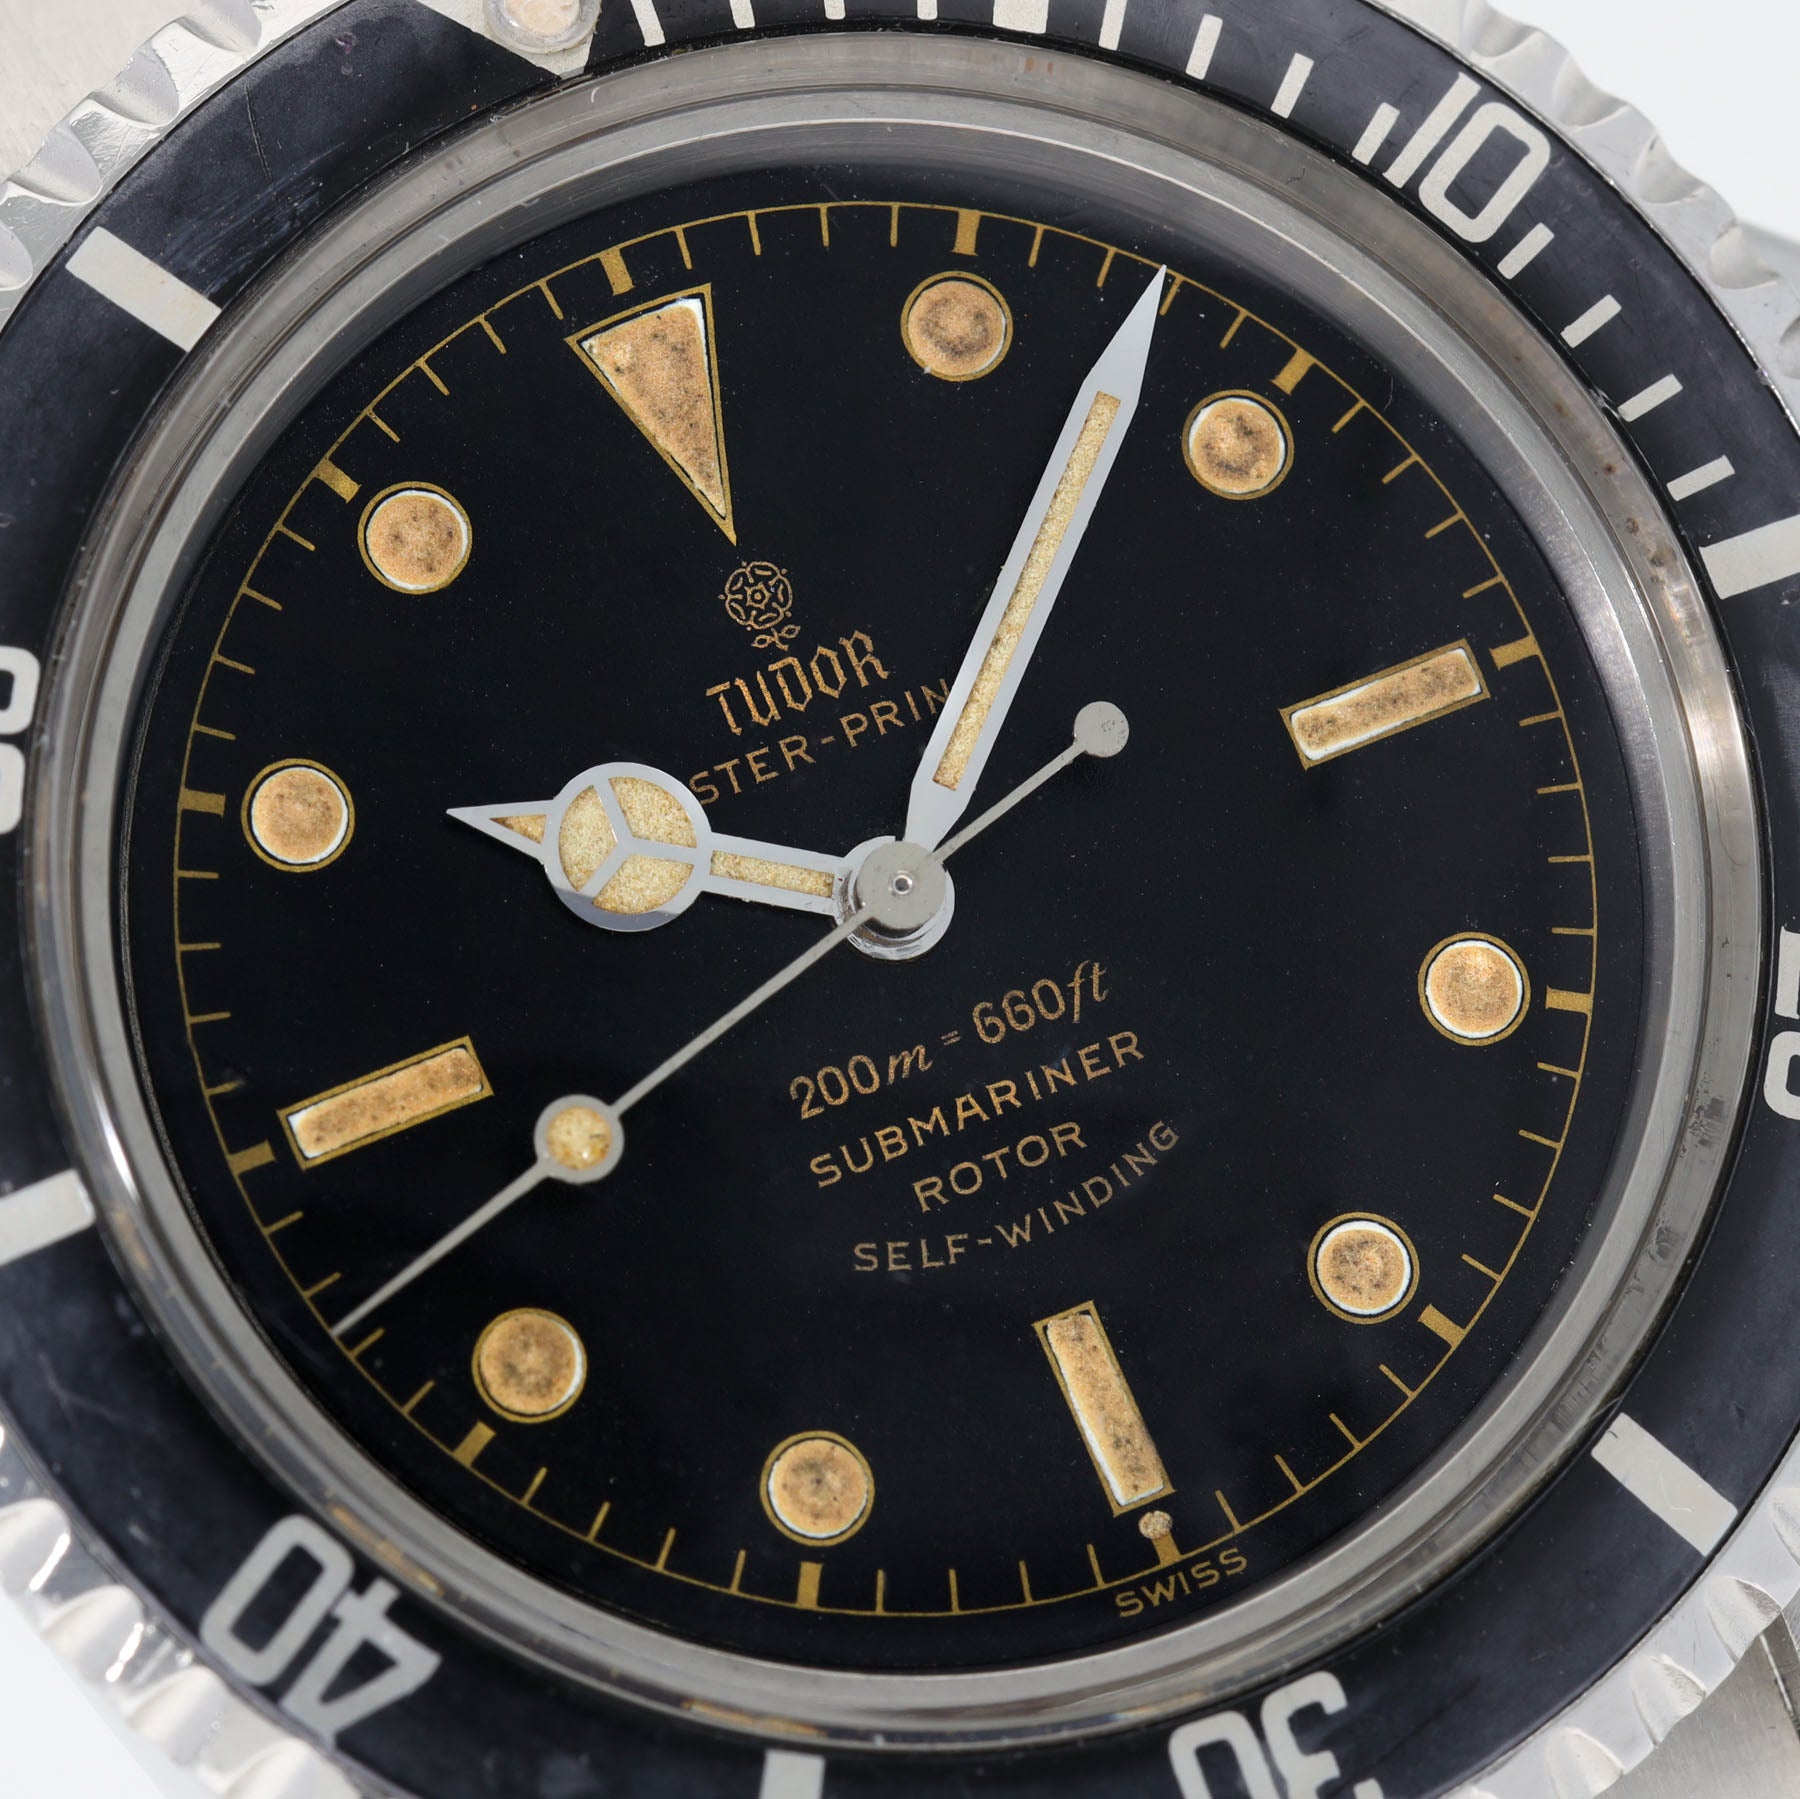 Tudor Submariner ref 7928 exclamation mark Chapter ring dial PCG case